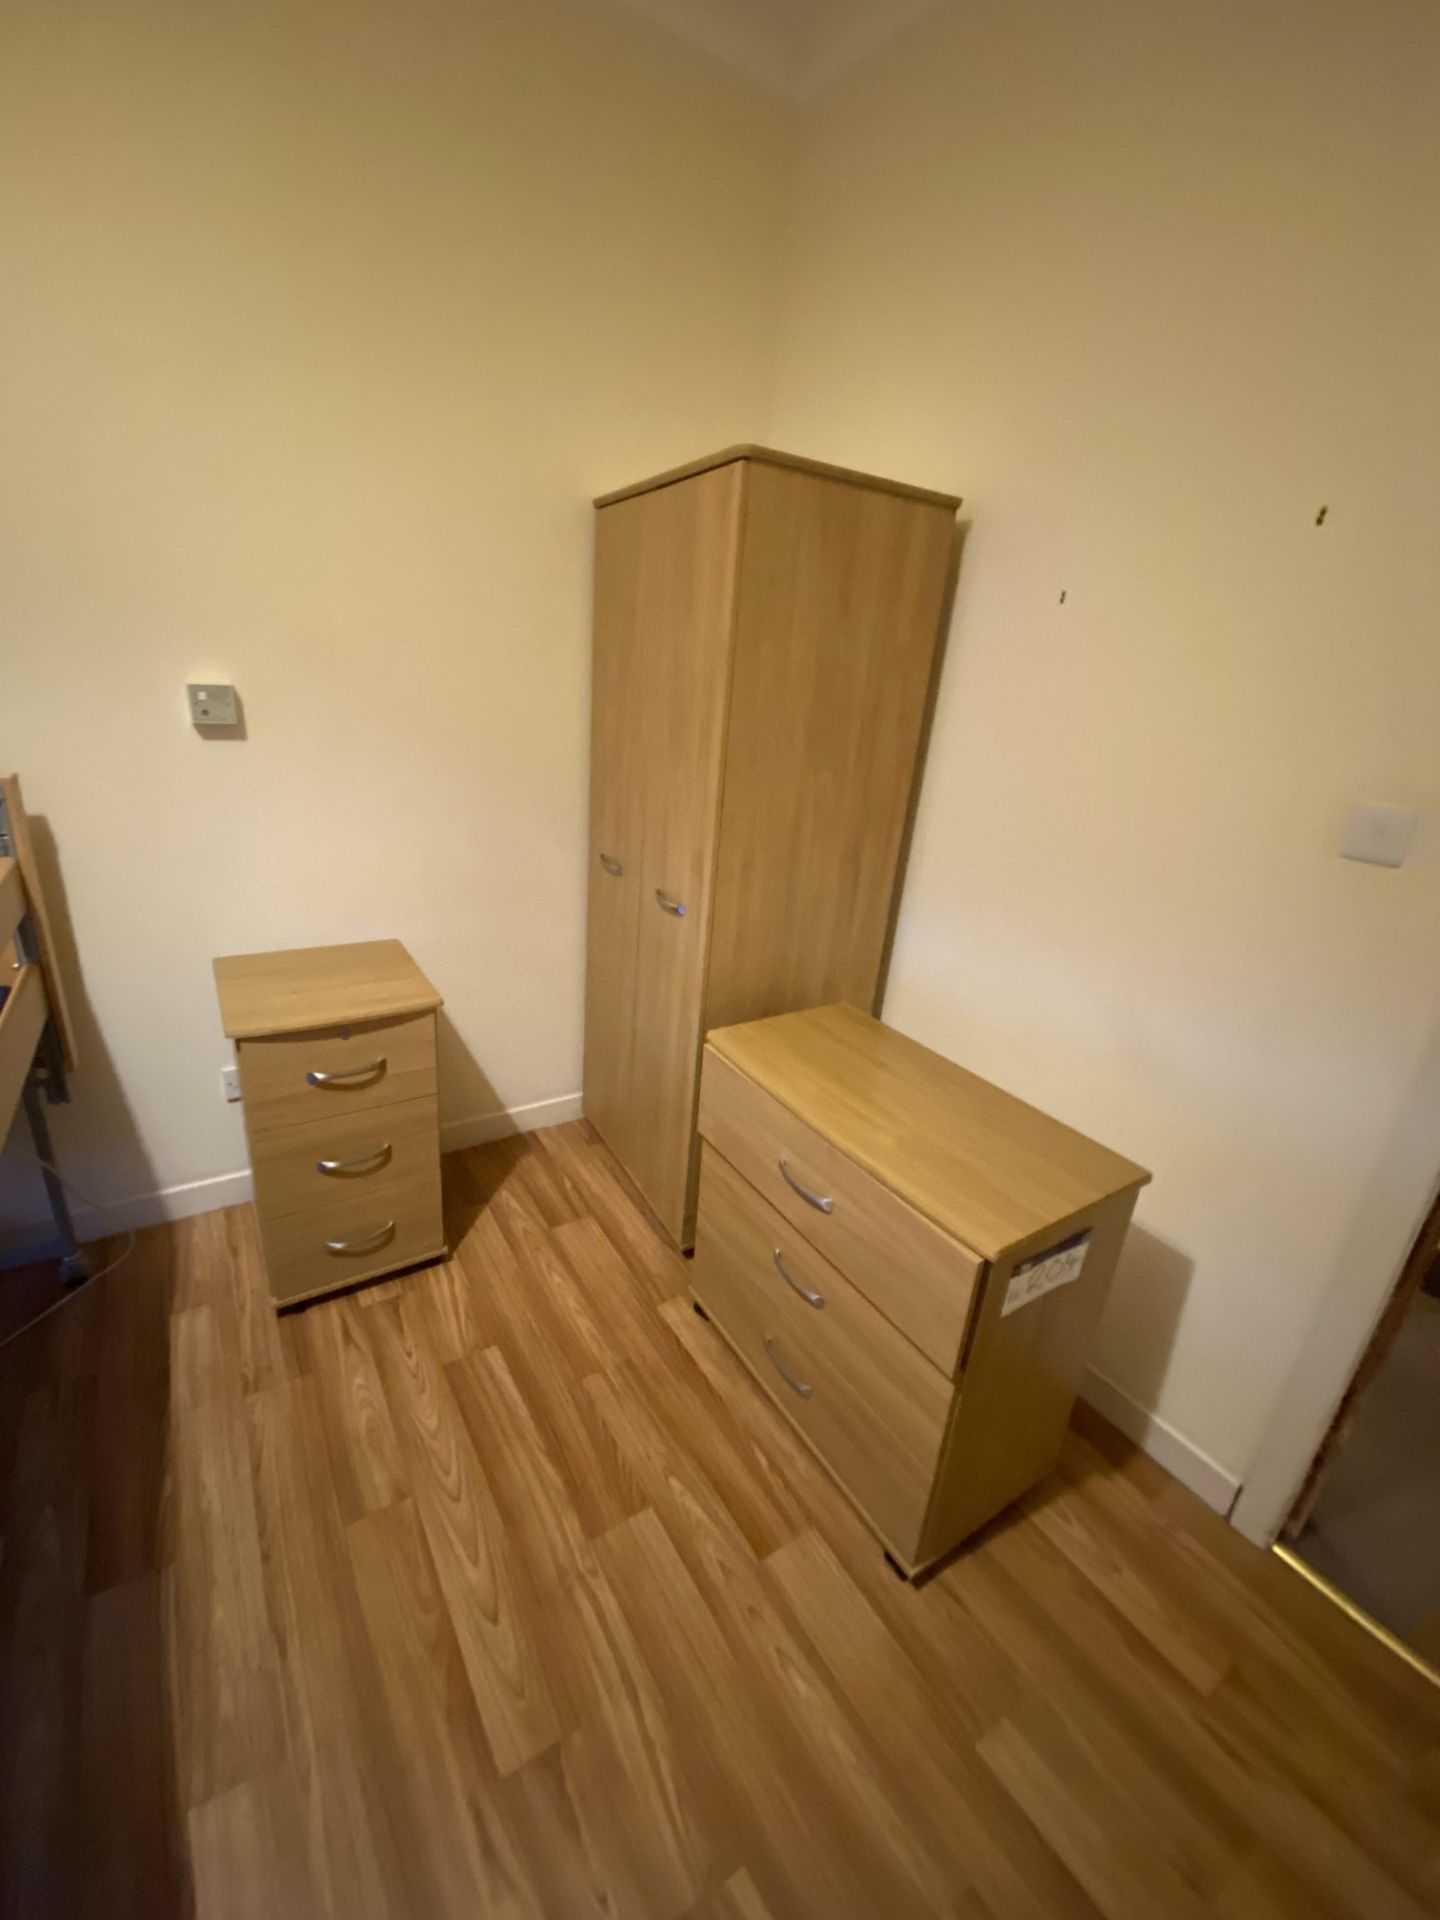 Remaining Bedroom Furniture, including oak laminated wardrobe, three drawer chest-of-drawers,